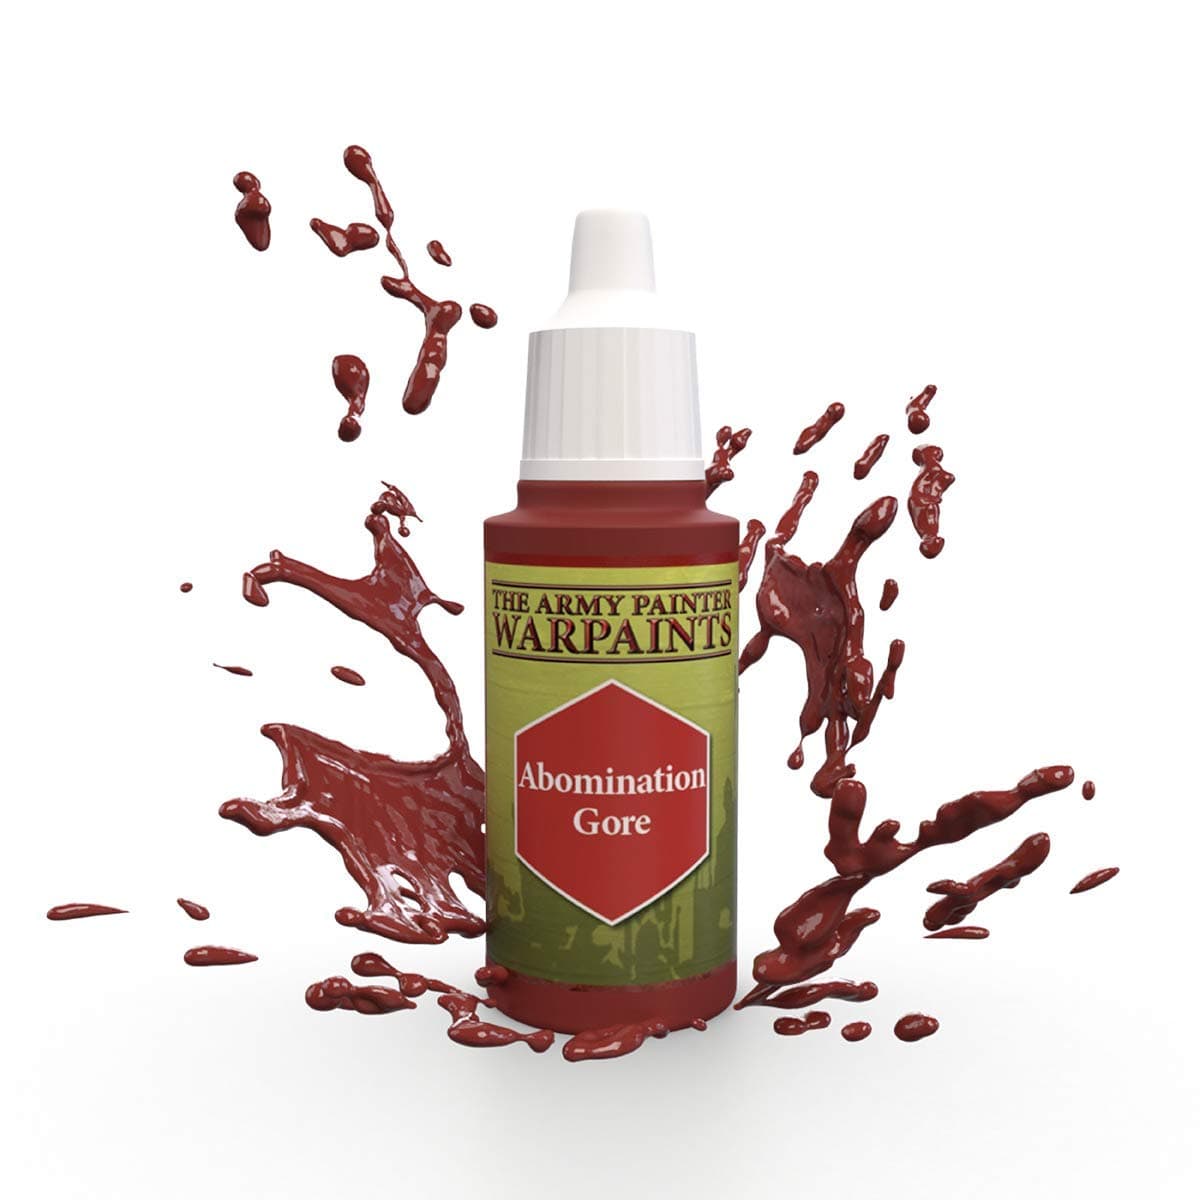 The Army Painter Accessories The Army Painter Warpaints: Abomination Gore 18ml